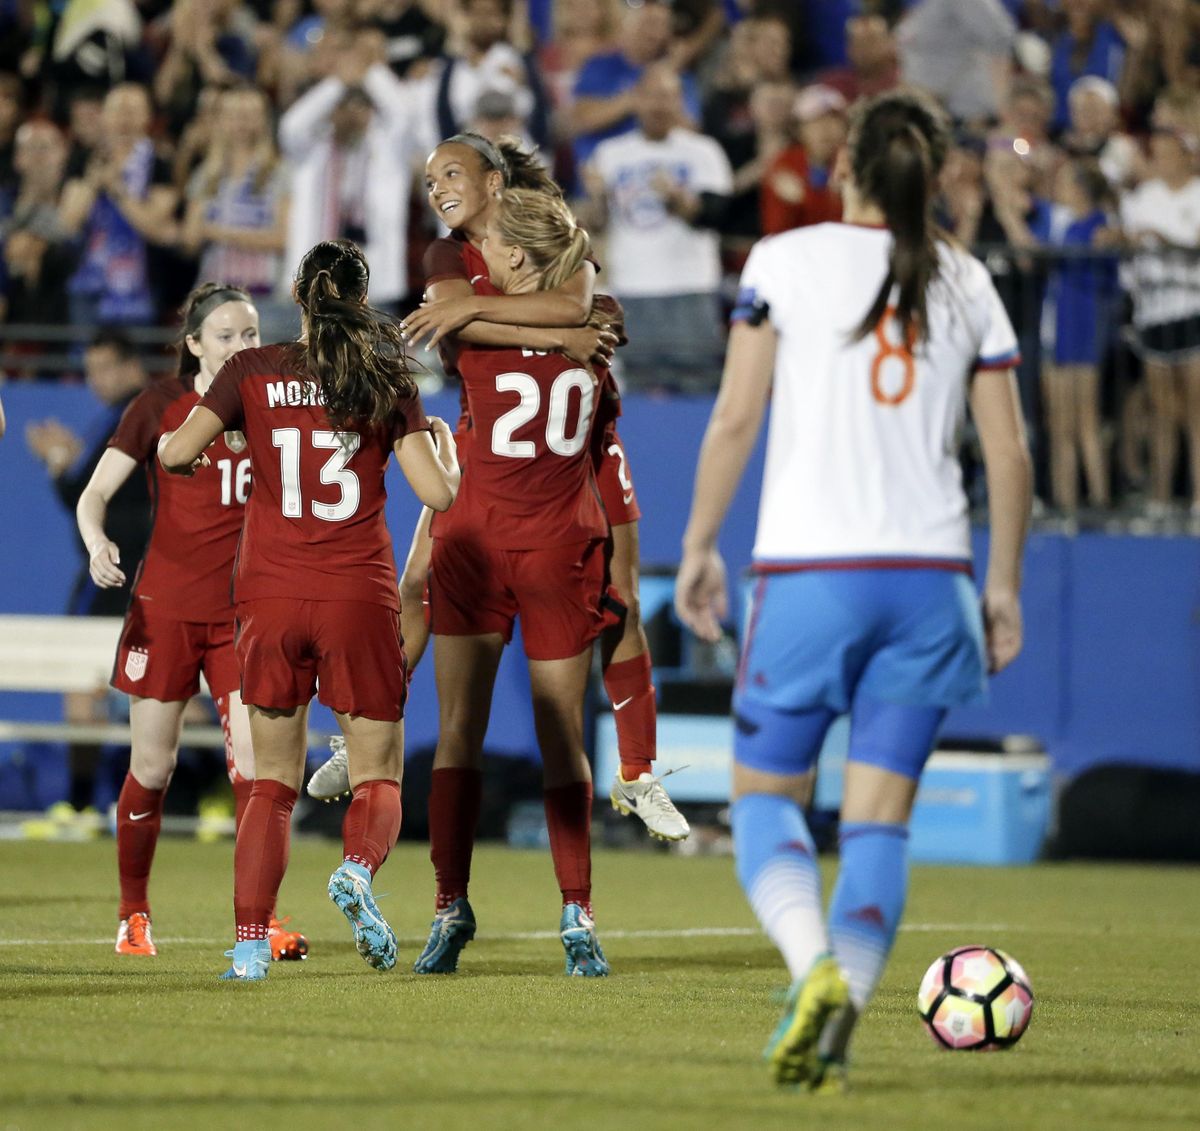 U.S. midfielder Allie Long (20) hugs Mallory Pugh as they celebrate a goal by Long with Rose Lavelle (16) and Alex Morgan (13) in the second half of an international friendly soccer match against Russia in Frisco, Texas, Thursday, April 6, 2017. Russia defender Daria Makarenko (8) walks by. (Tony Gutierrez / Associated Press)